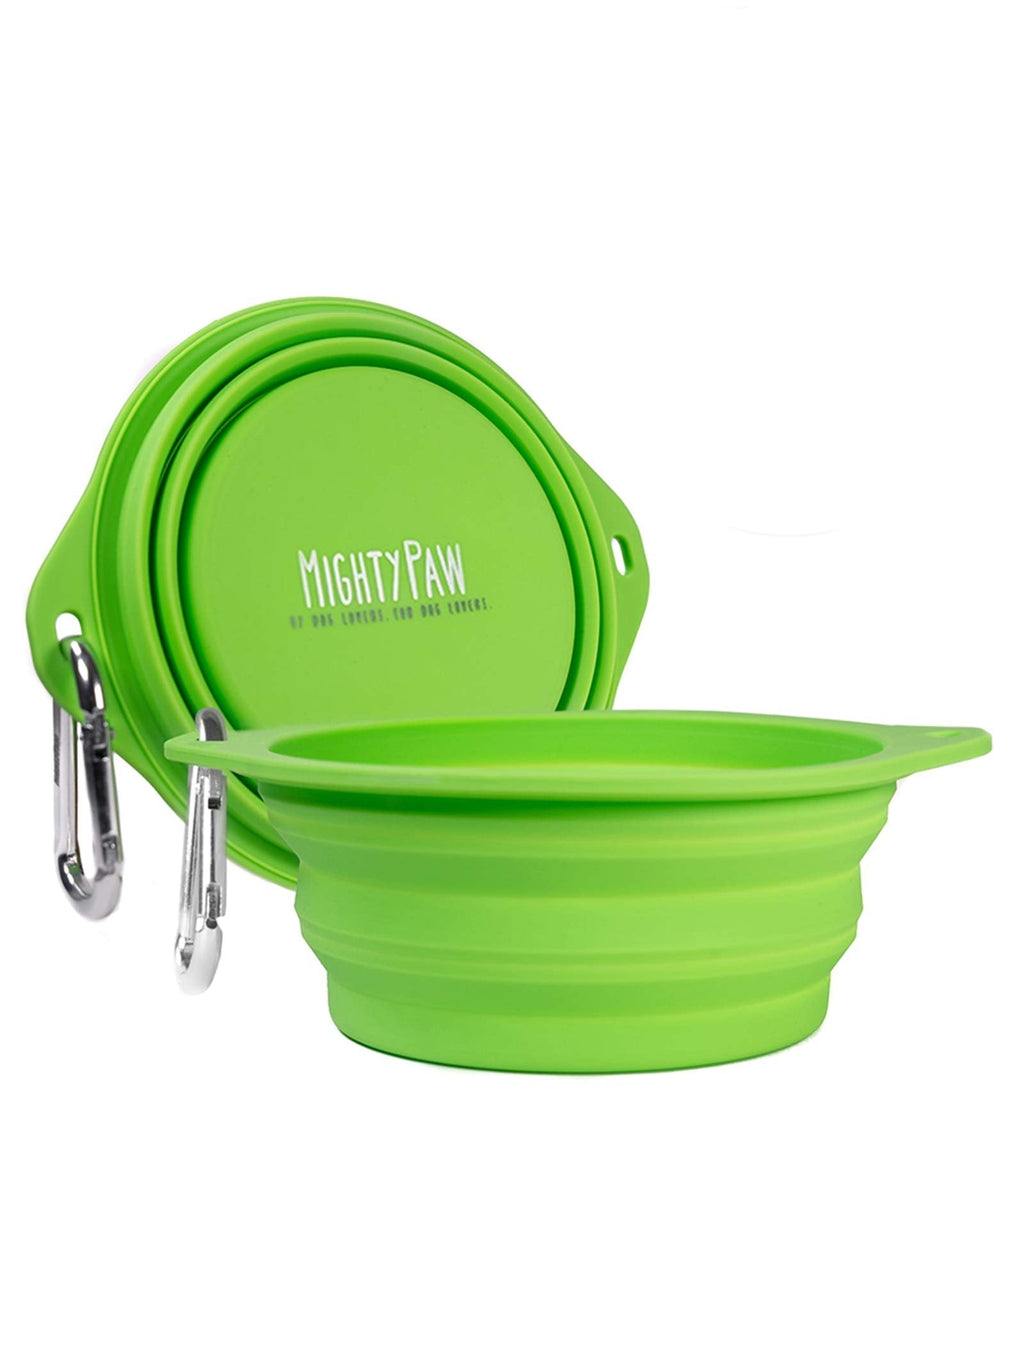 Mighty Paw Collapsible Travel Dog Bowl Set - 2 Pack (800ml) | Food Safe Silicone Food & Water Bowls for Pets. Bonus Carabiner Clip for Hiking, Camping or Walking. Lightweight & Leak-Proof (Green) Green - PawsPlanet Australia